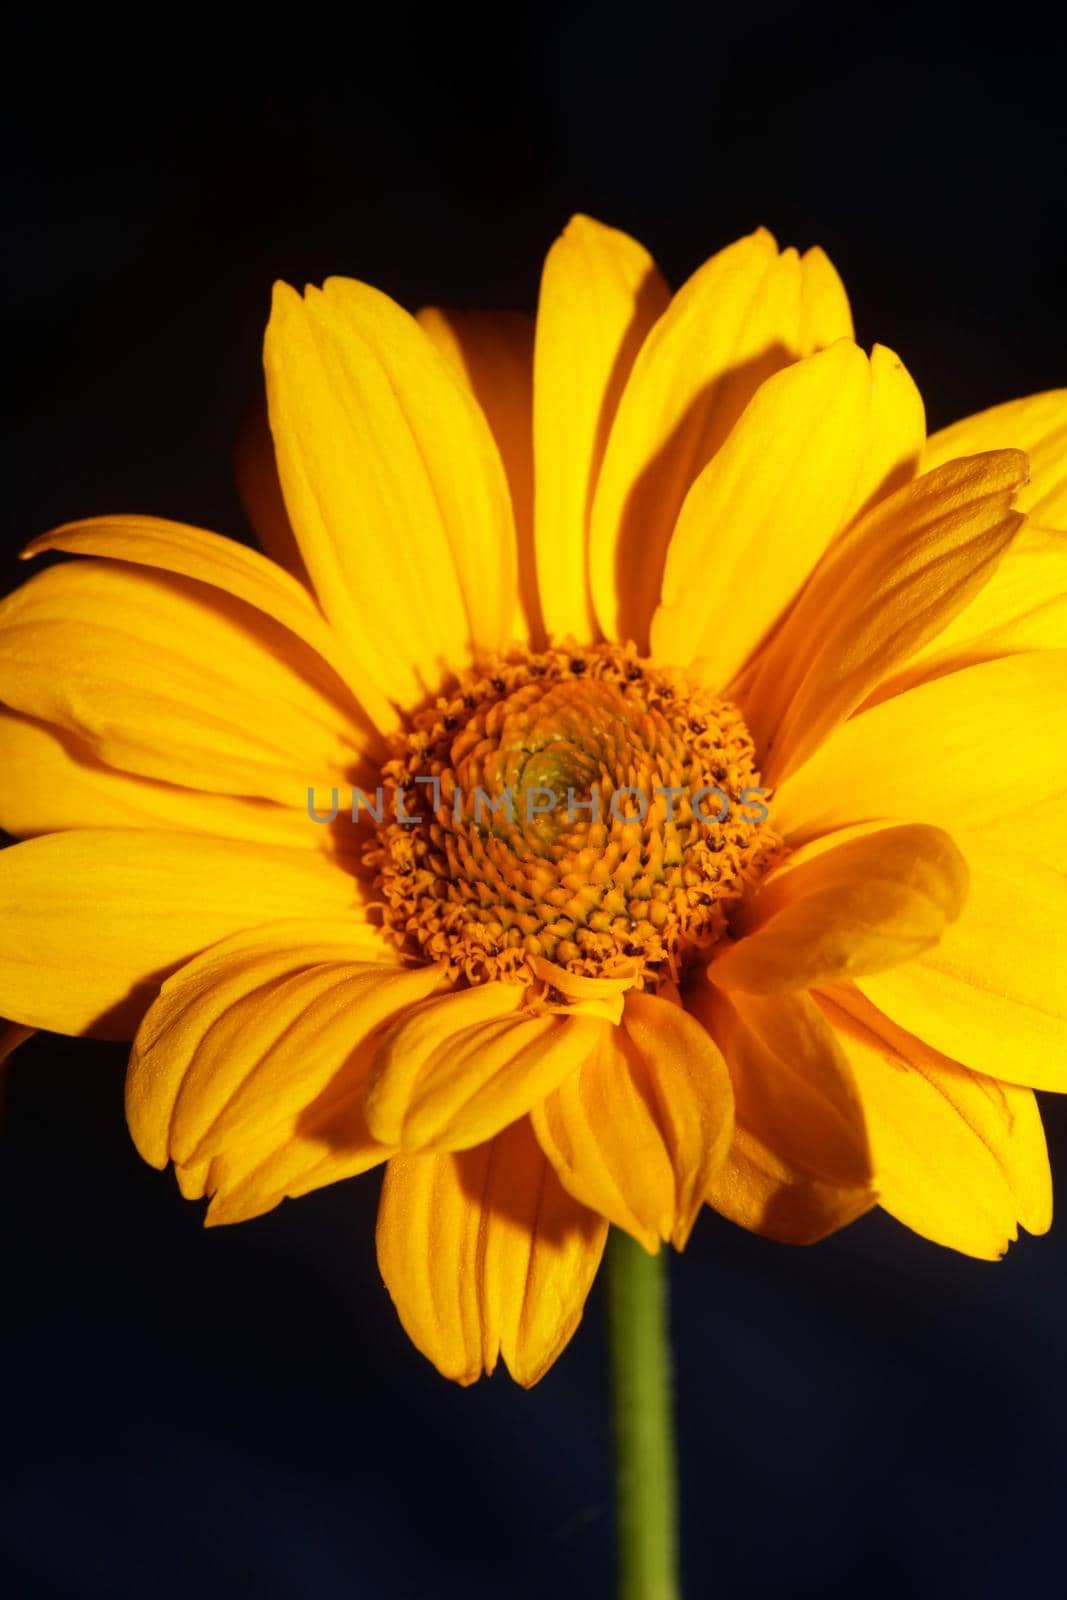 Yellow flower blossom close up botanical background heliopsis helianthoides family compositae big size metal prints high quality nature picture